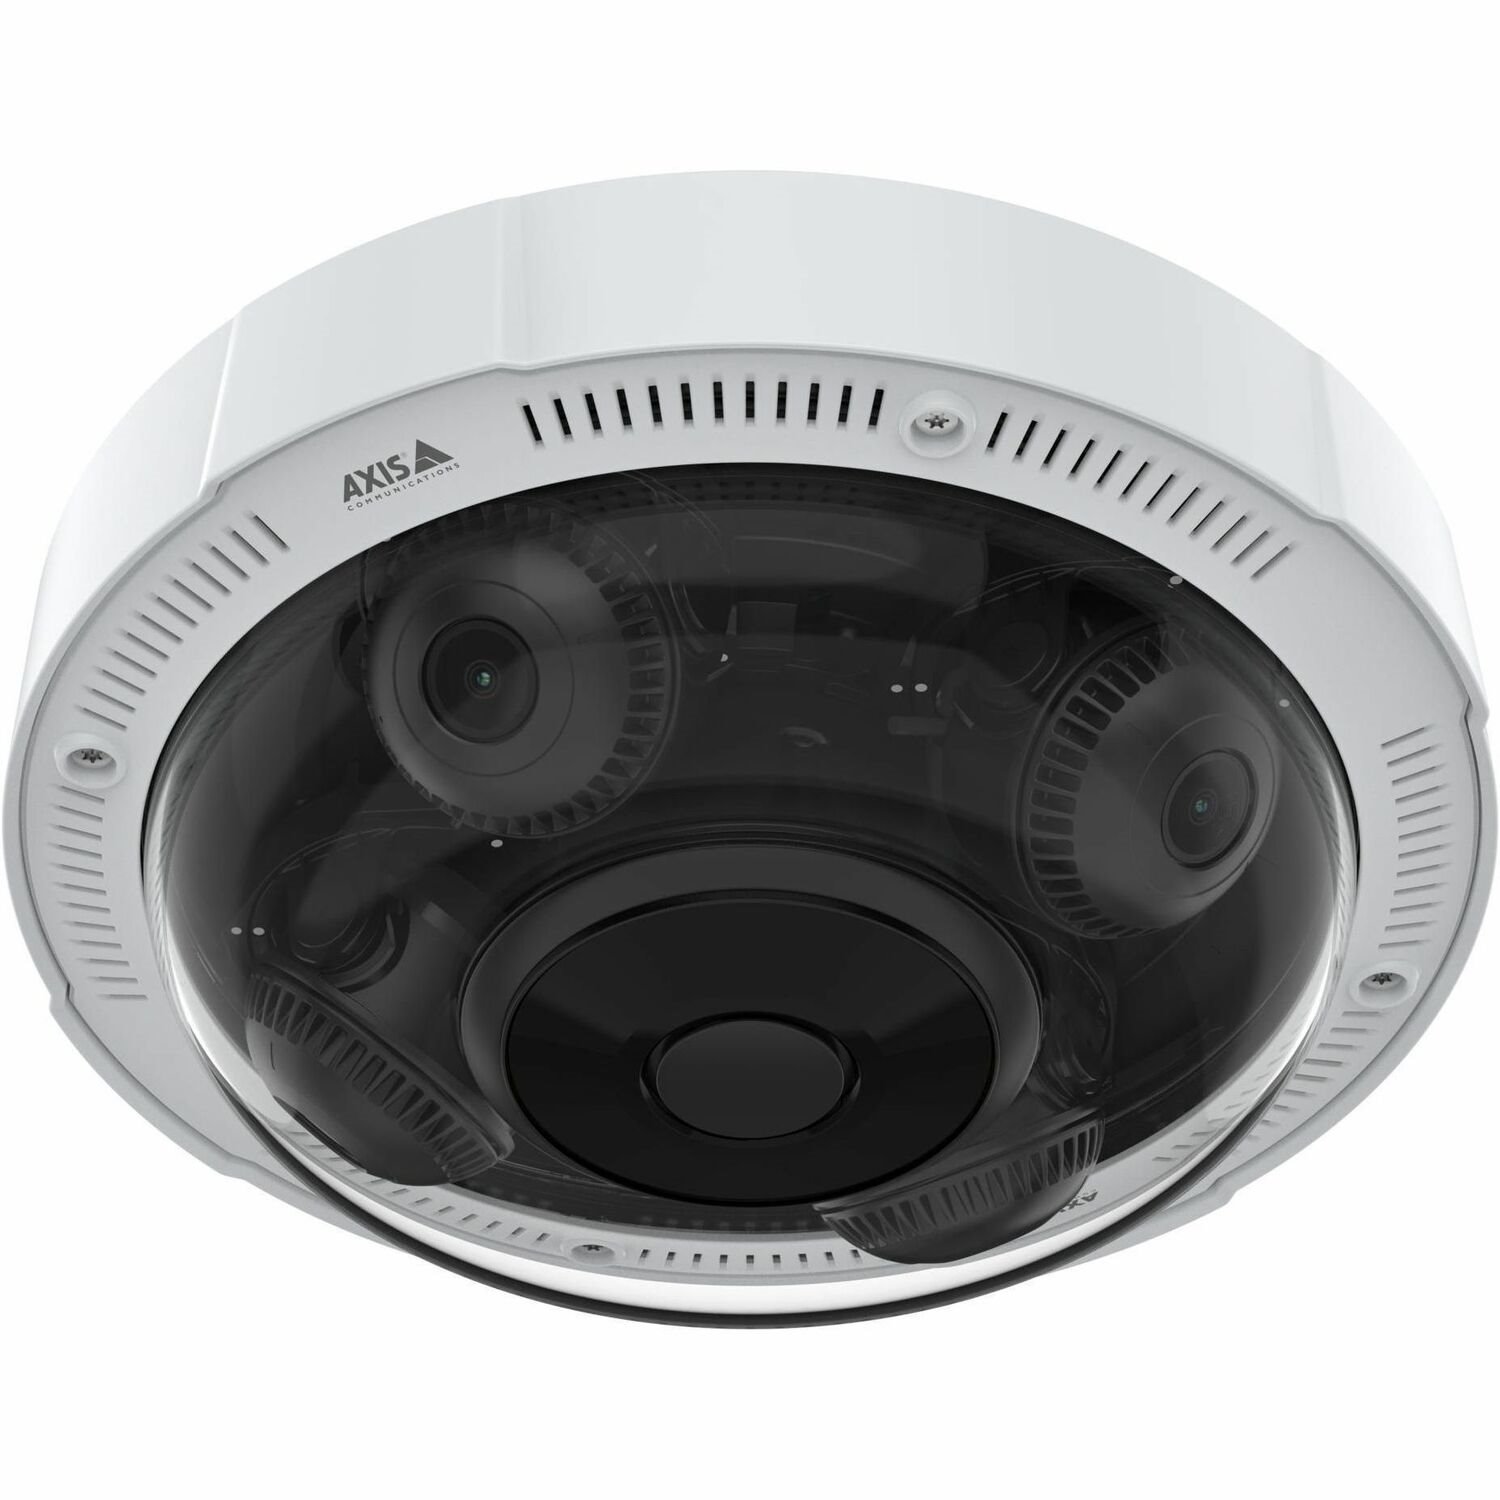 AXIS Panoramic P3735-PLE 2 Megapixel Full HD Network Camera - Color - White - TAA Compliant